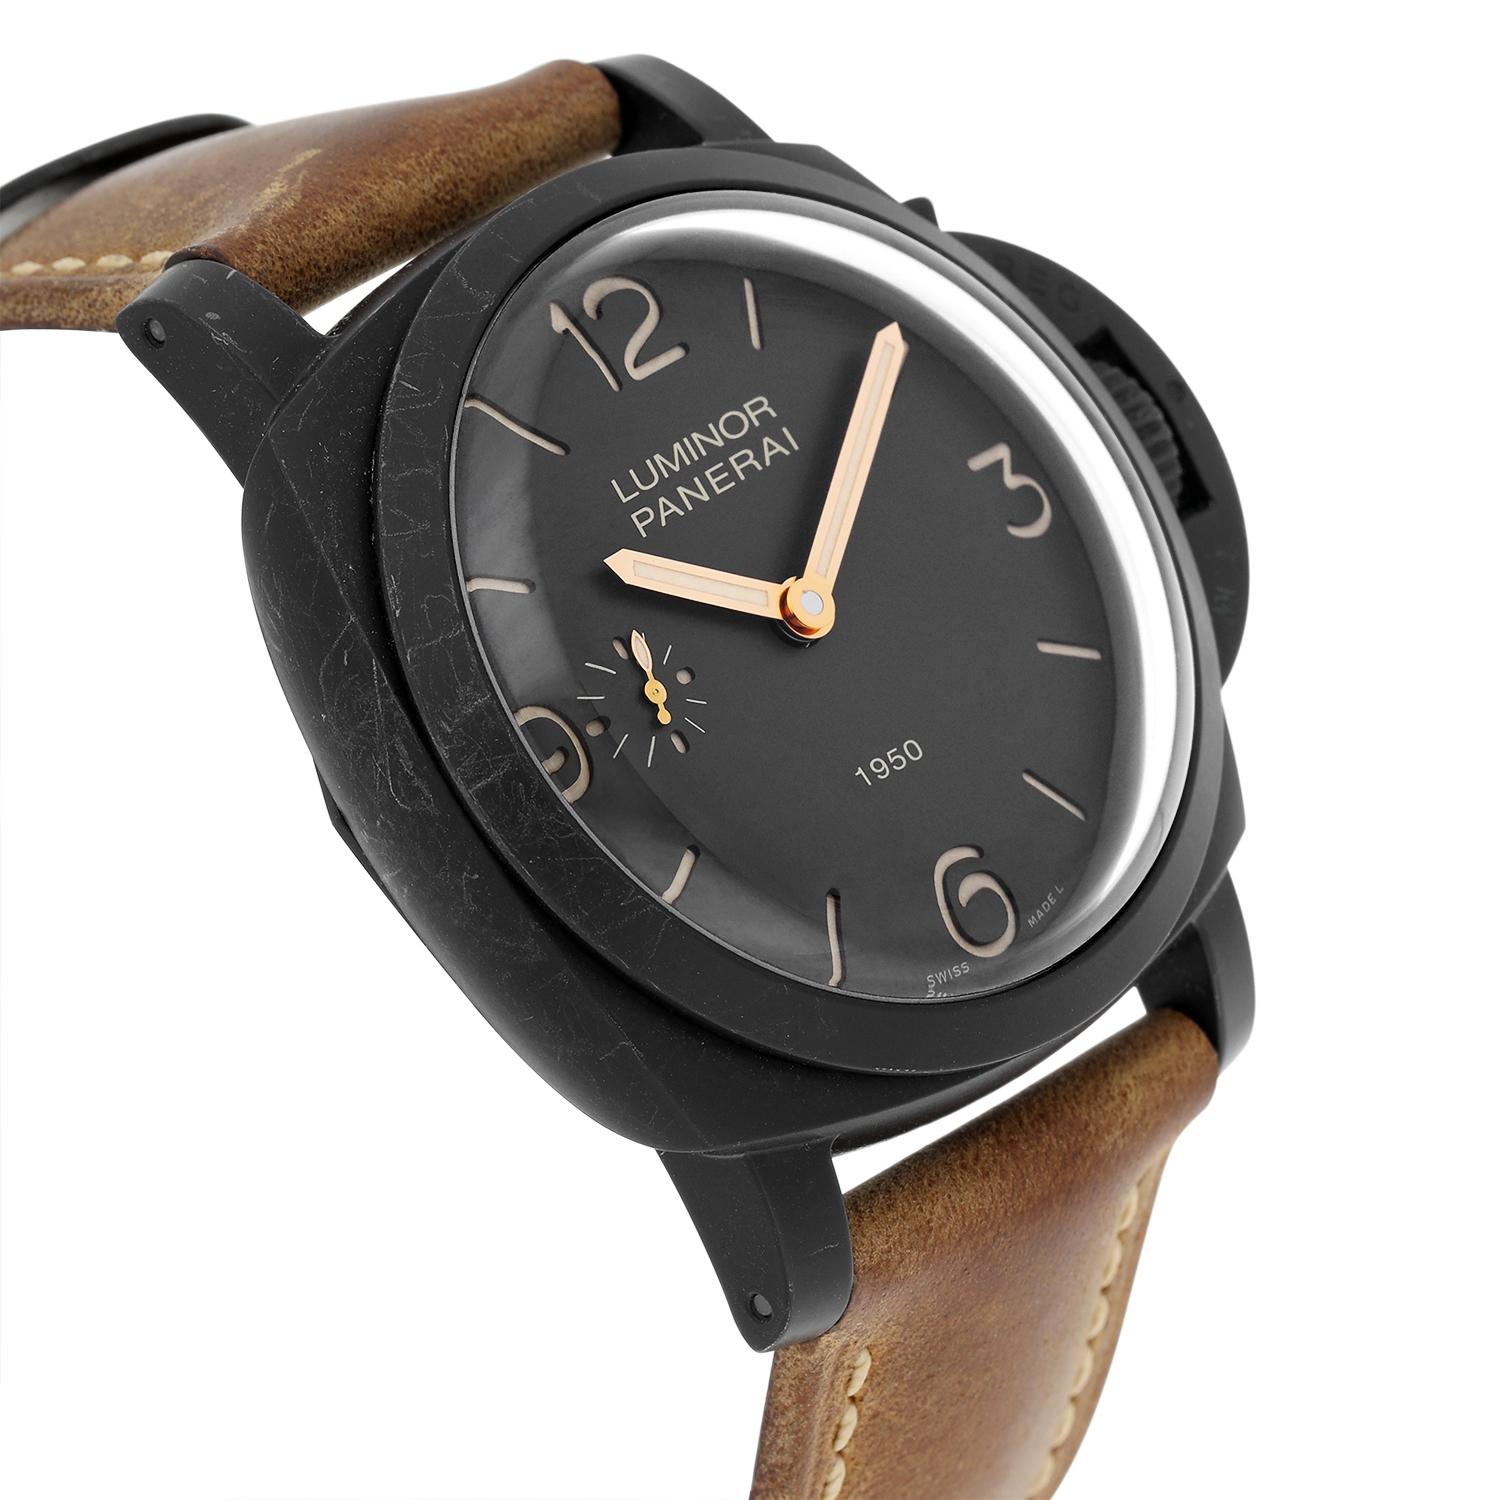 Panerai PAM00375 Luminor 1950 3DAYS Limited to 2000 Brown/Black In Excellent Condition For Sale In New York, NY